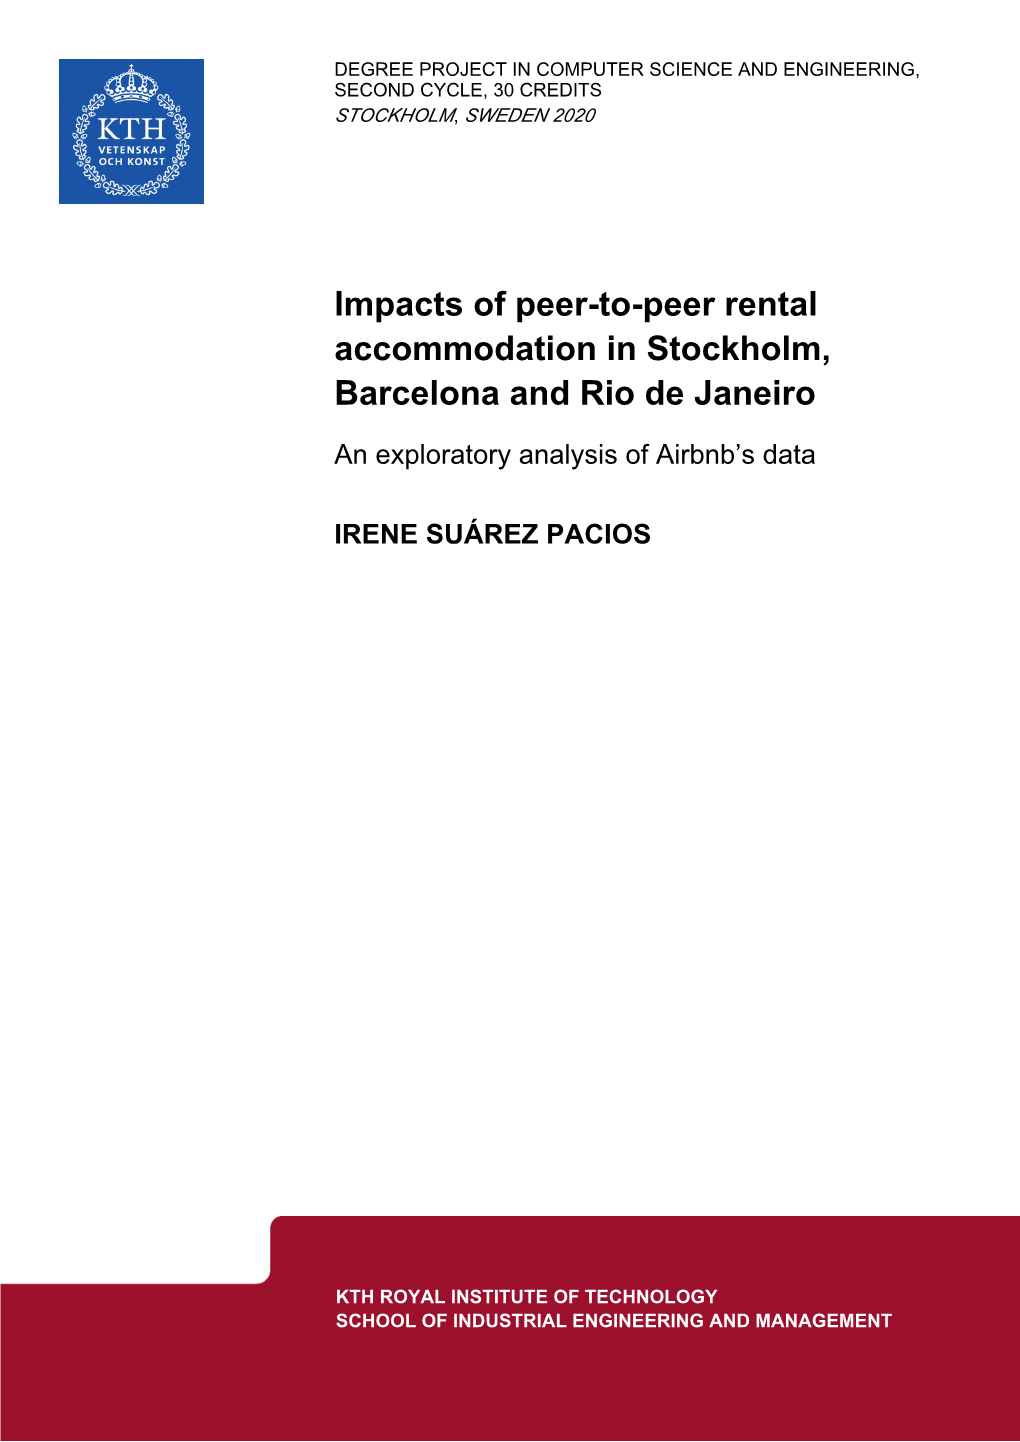 Impacts of Peer-To-Peer Rental Accommodation in Stockholm, Barcelona and Rio De Janeiro